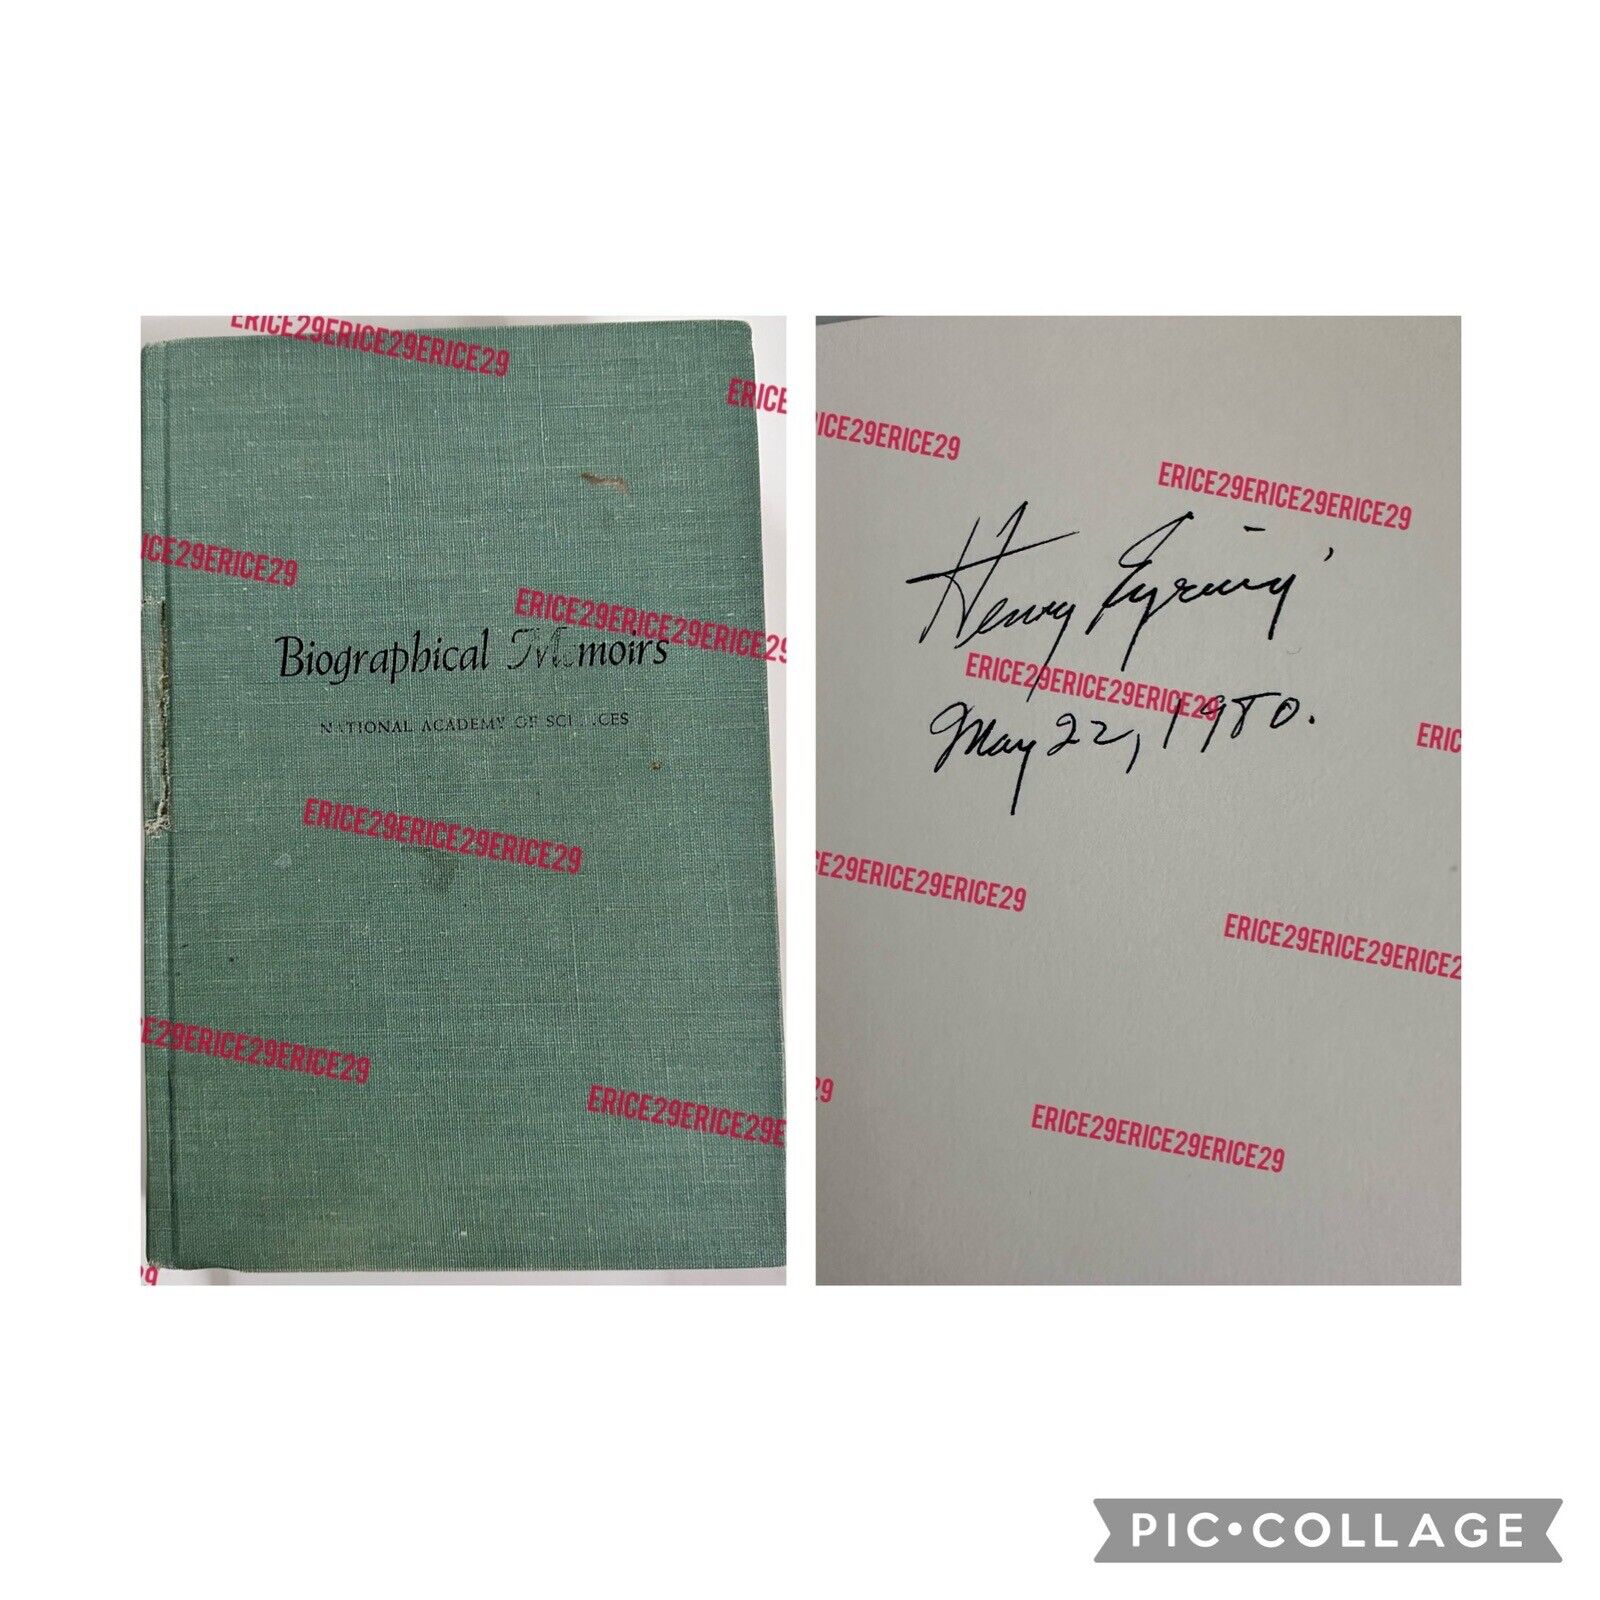 Henry Eyring “Chemist” Signed Inside Book National Academy of Science Vol. 51